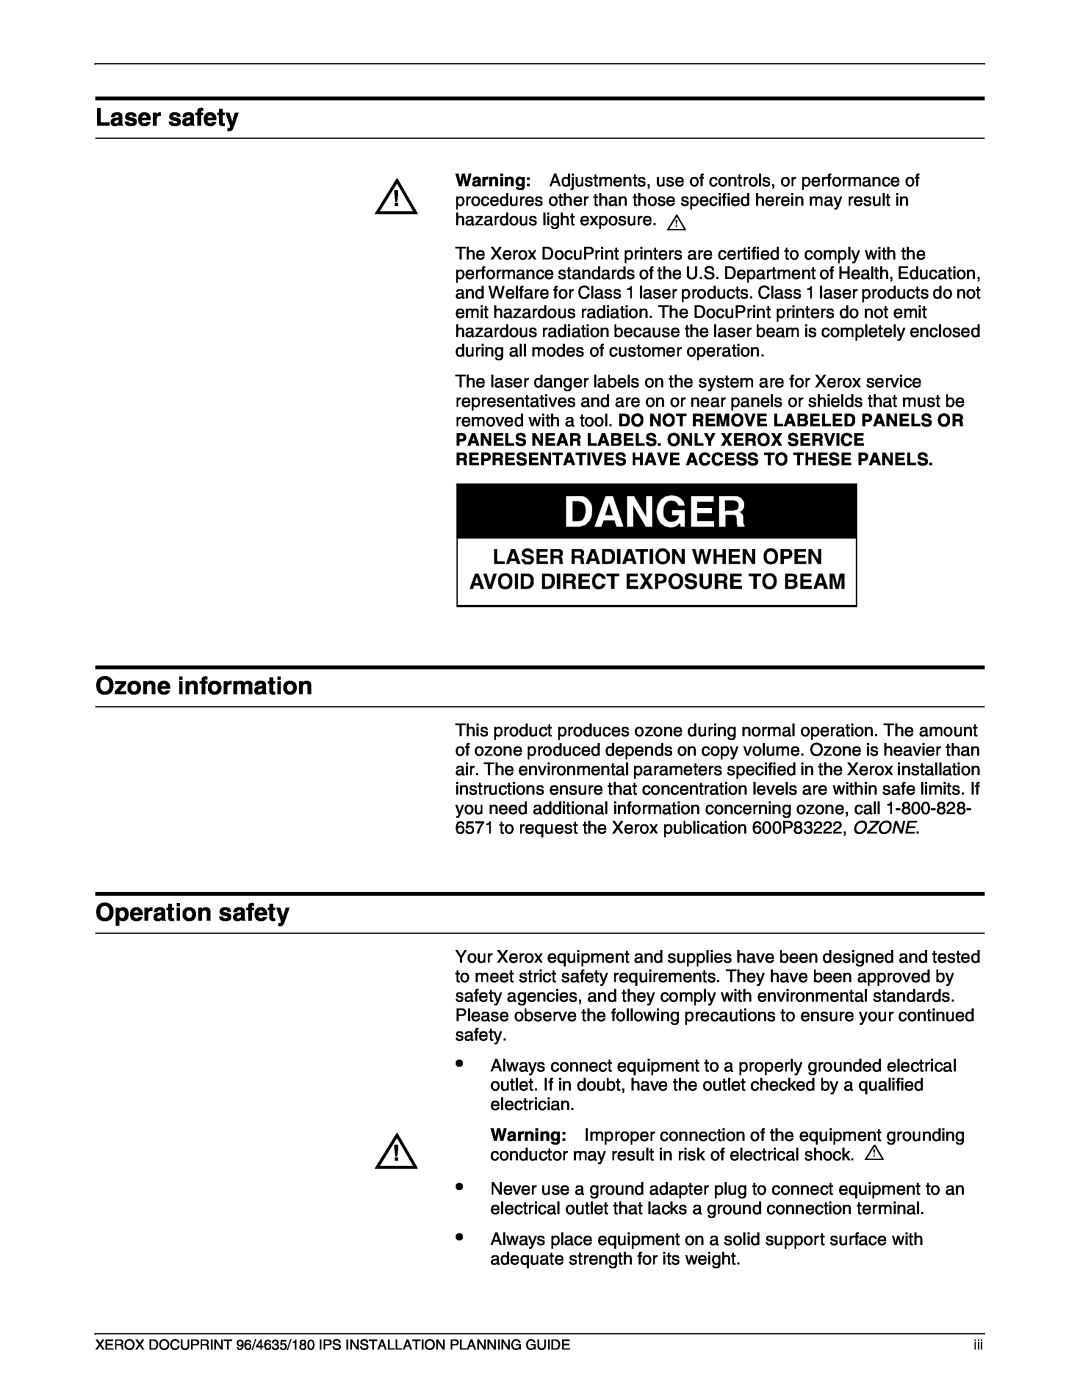 Xerox 180 IPS manual Laser safety, Ozone information, Operation safety 